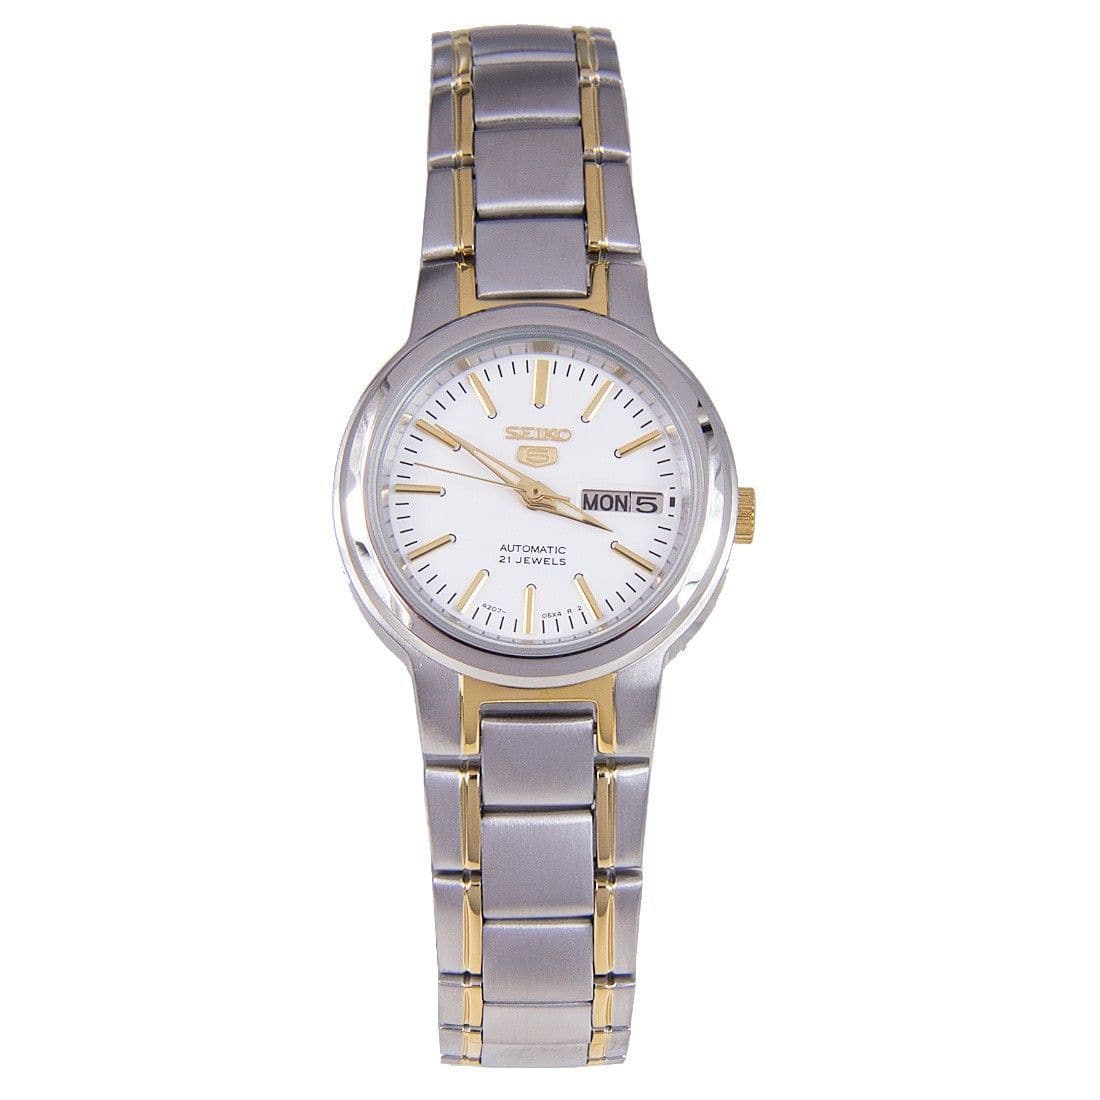 Seiko 5 Classic Ladies Size White Dial 2 Tone Gold Plated Stainless Steel Strap Watch SYME44K1 - Diligence1International